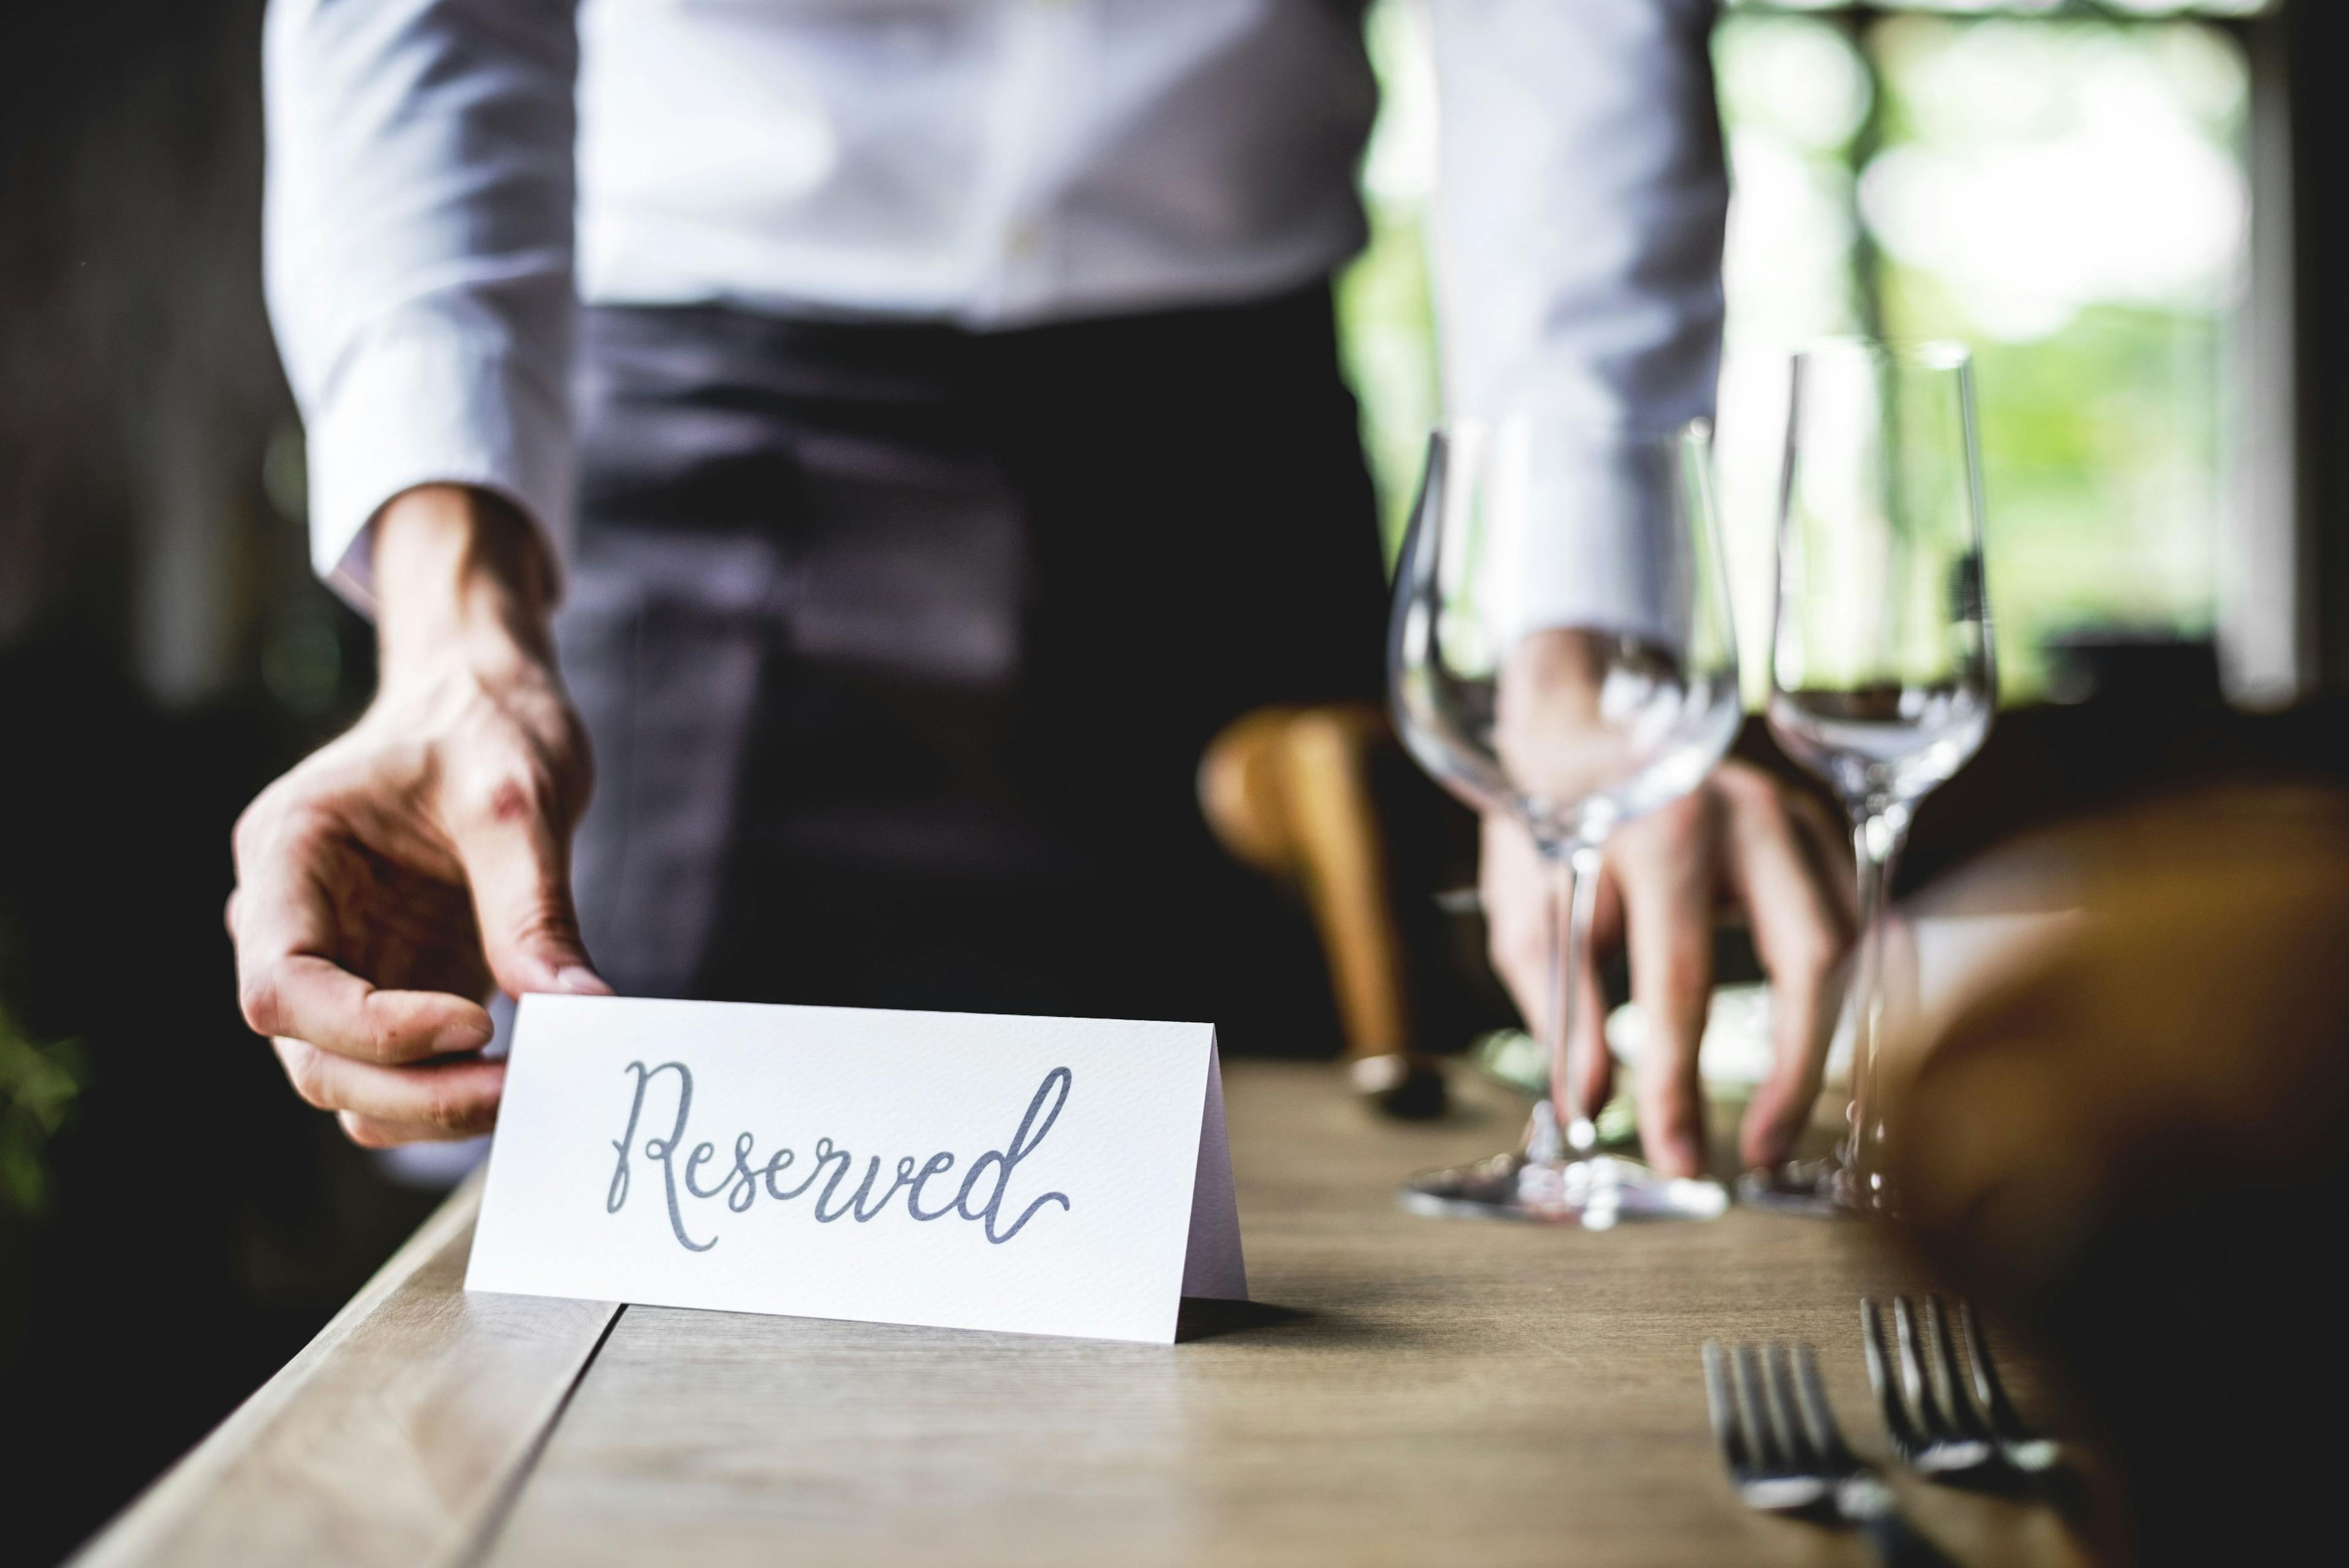 An image of a restaurant waiter placing a reserved sign on a table, indicating that it is reserved for a particular reservation.